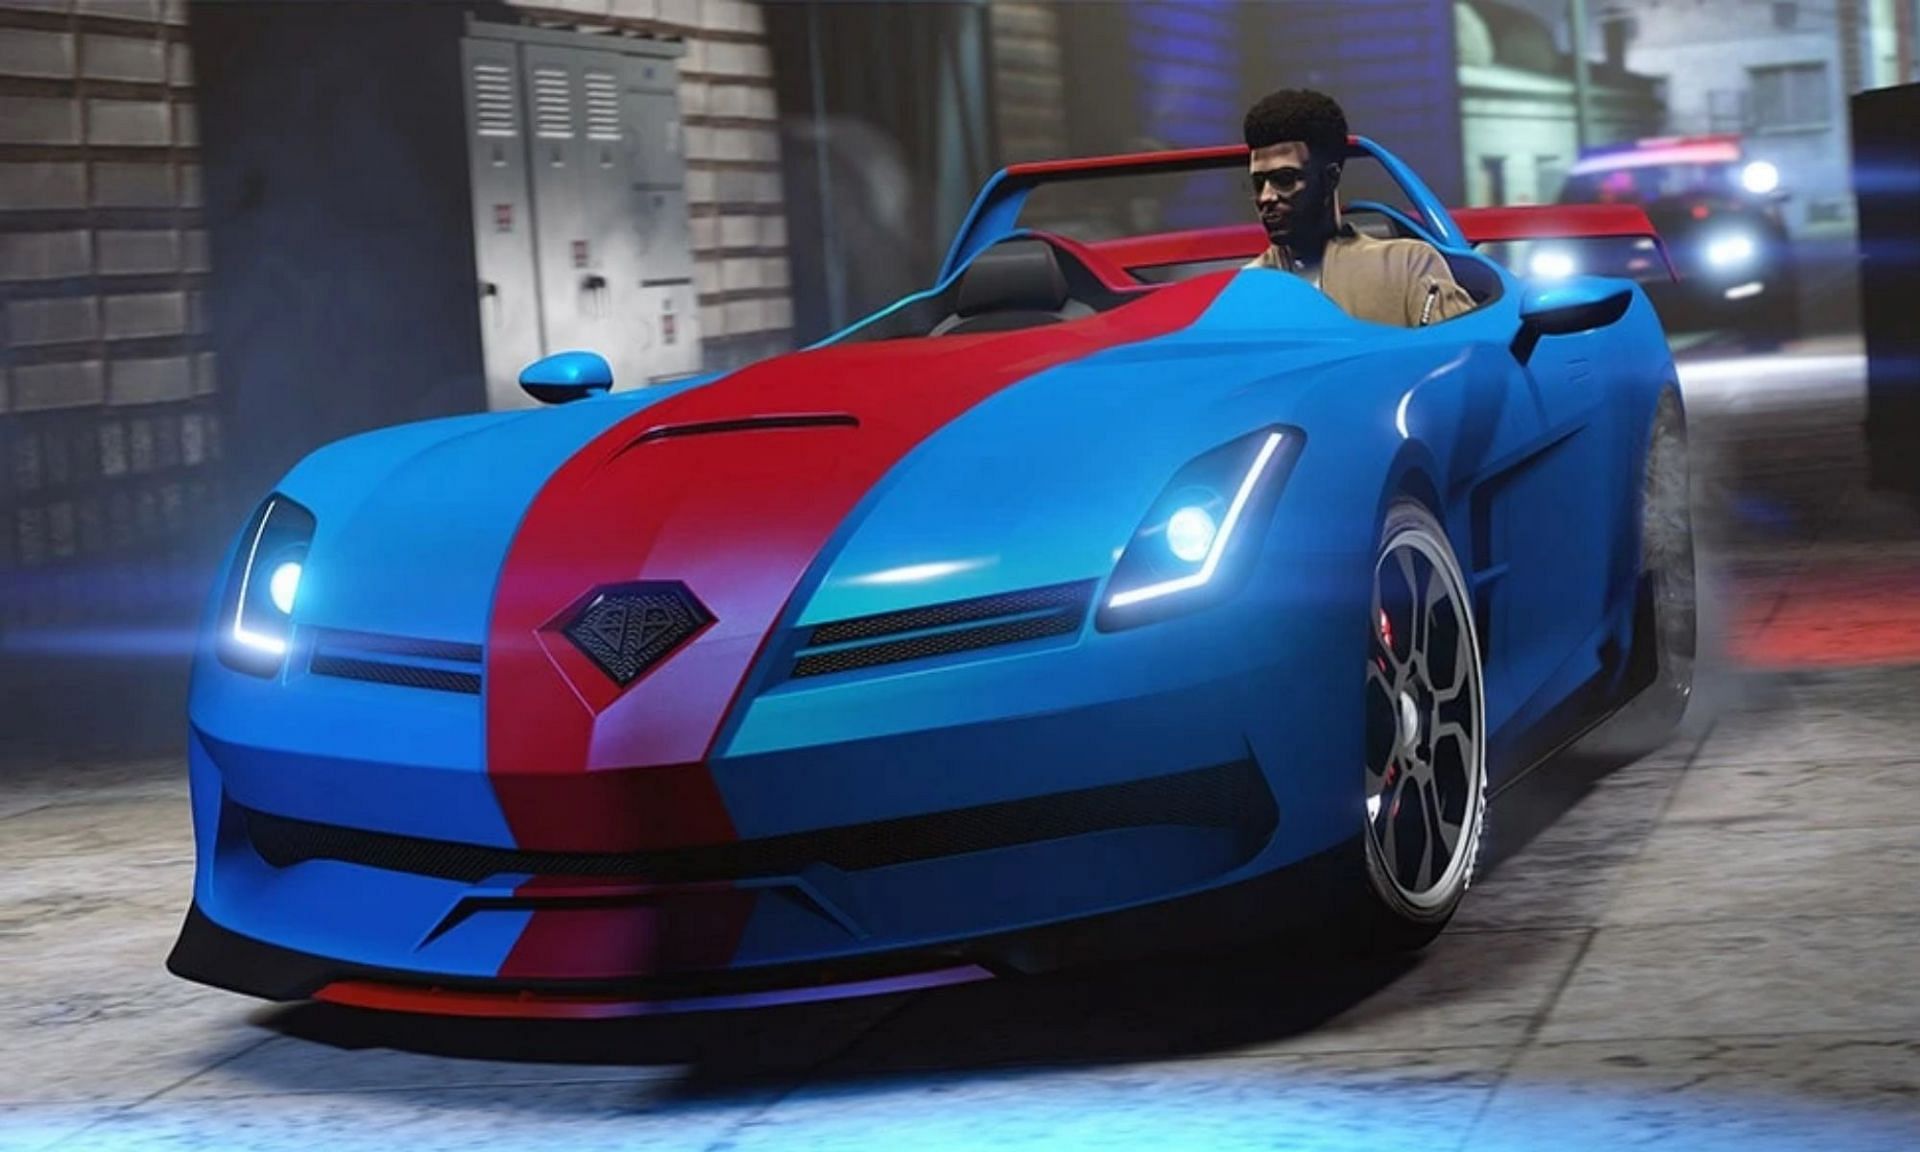 Rockstar really loves referencing Stirling Moss in some capacity (Image via Rockstar Games)